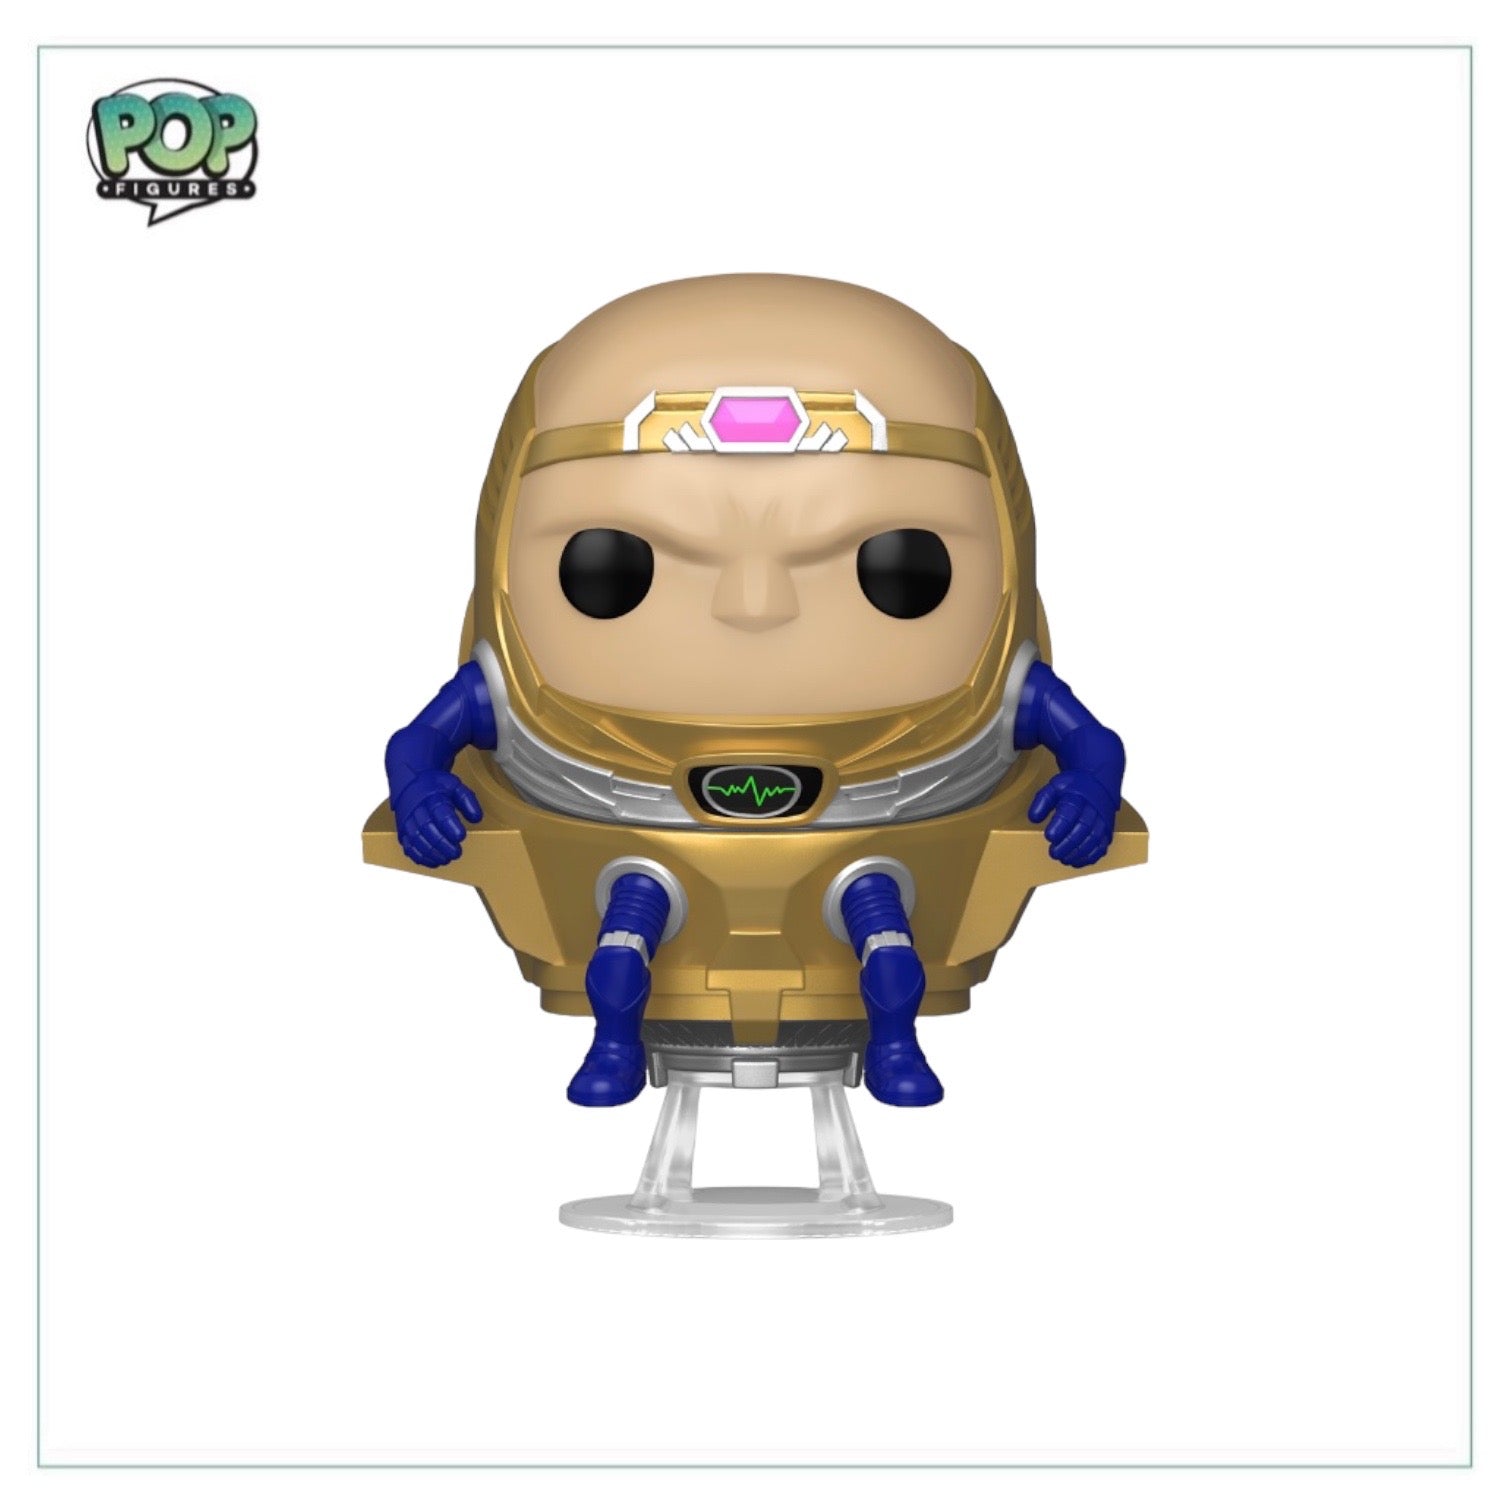 M.O.D.O.K #1262 (Unmasked) Funko Pop! - Ant-Man & the Wasp Quantumania - SDCC 2023 Shared Exclusive